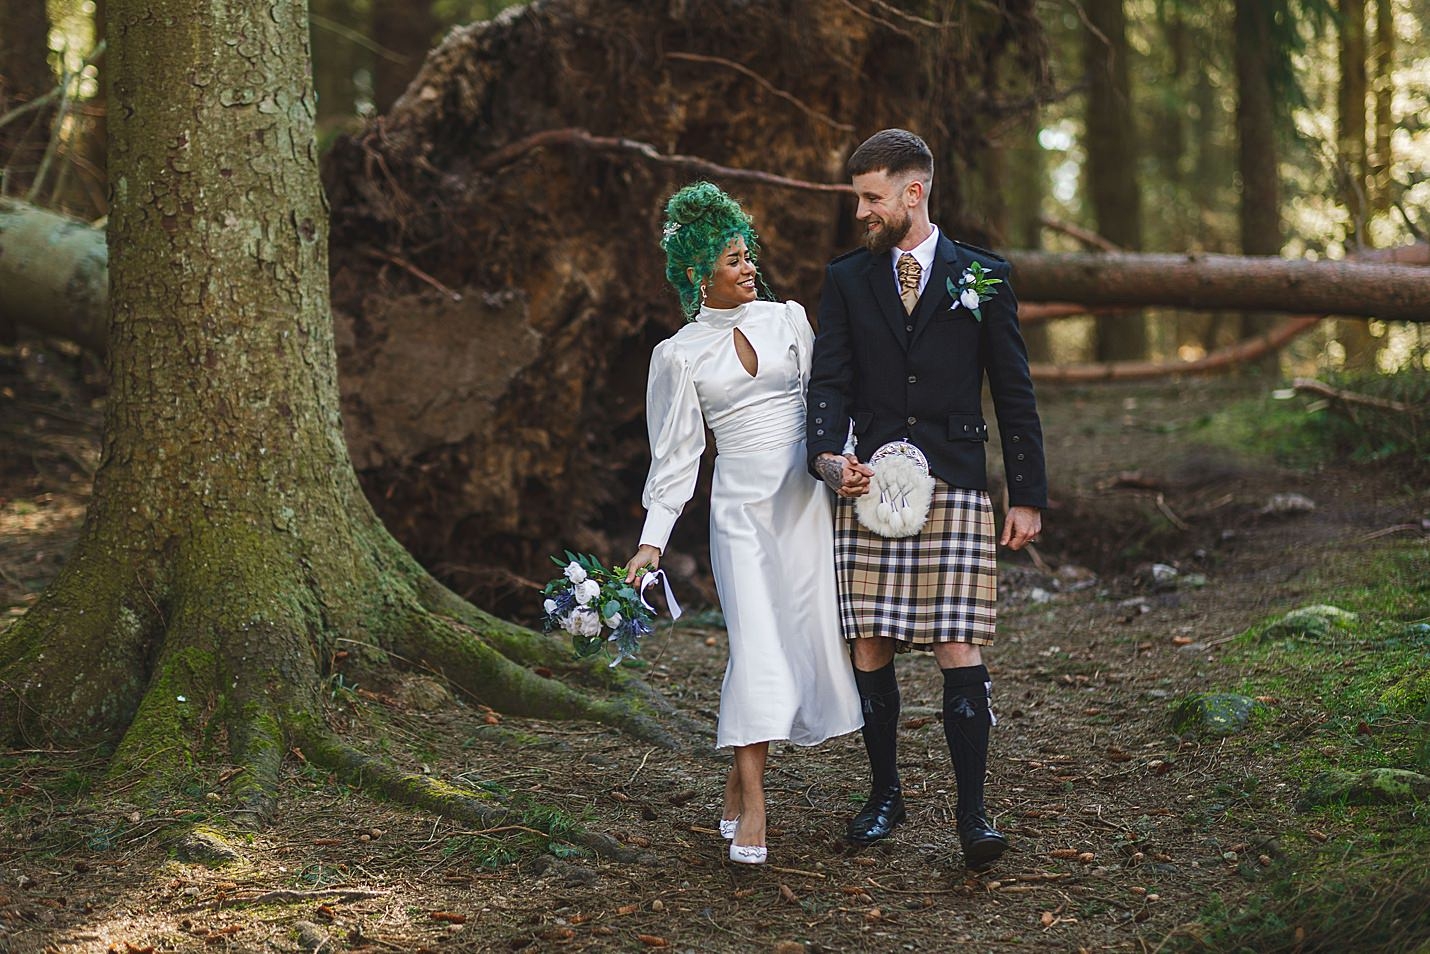 bride and groom smile as they walk hand in hand towards camera through forest with fallen tree in background marischal college wedding clarke joss photography